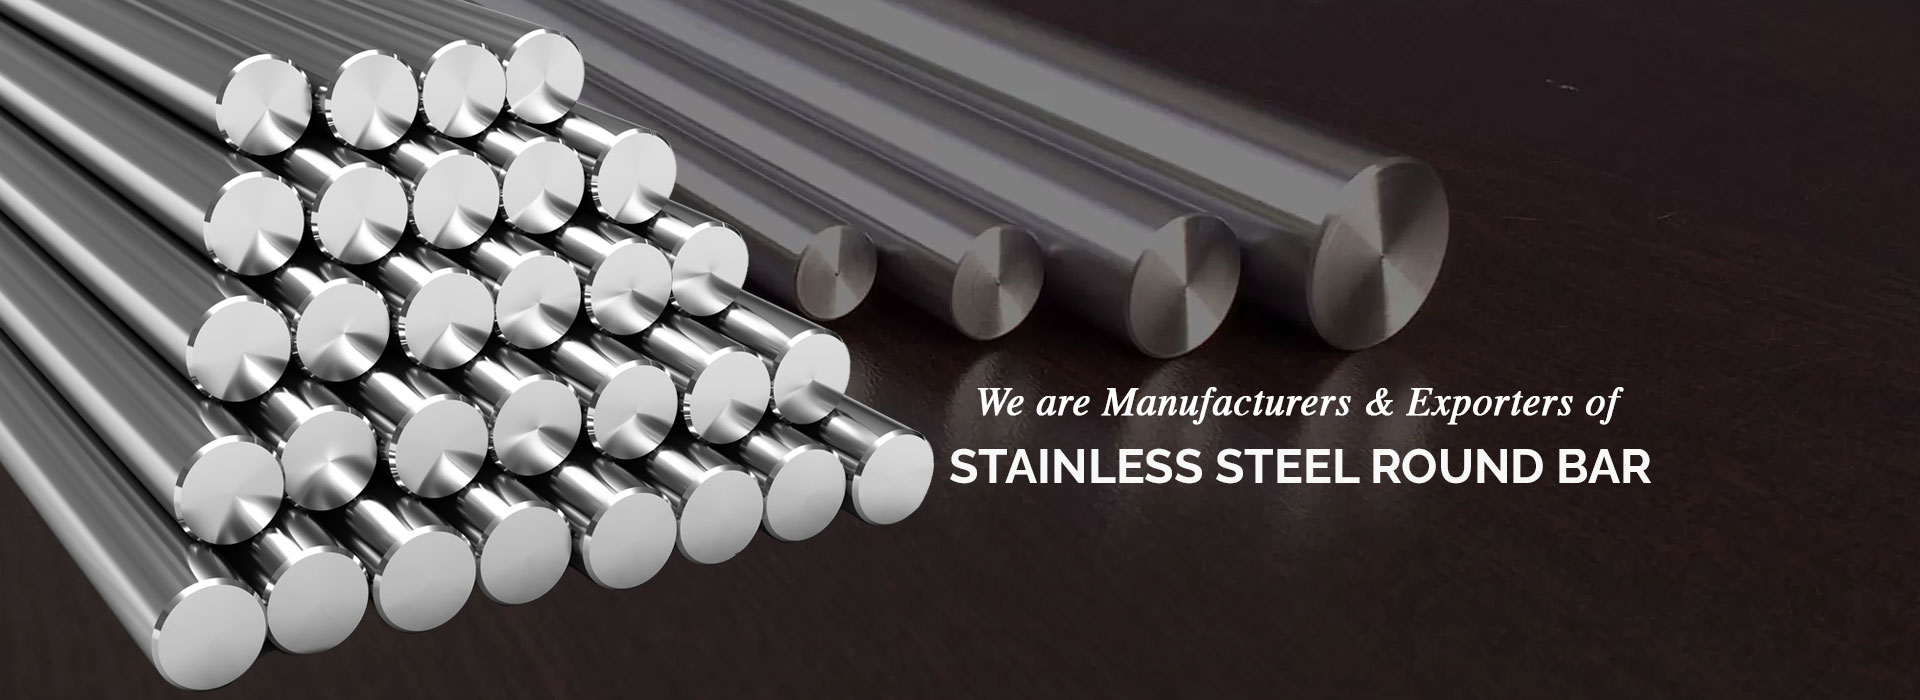 Stainless Steel Round Bar Manufacturers in Singapore